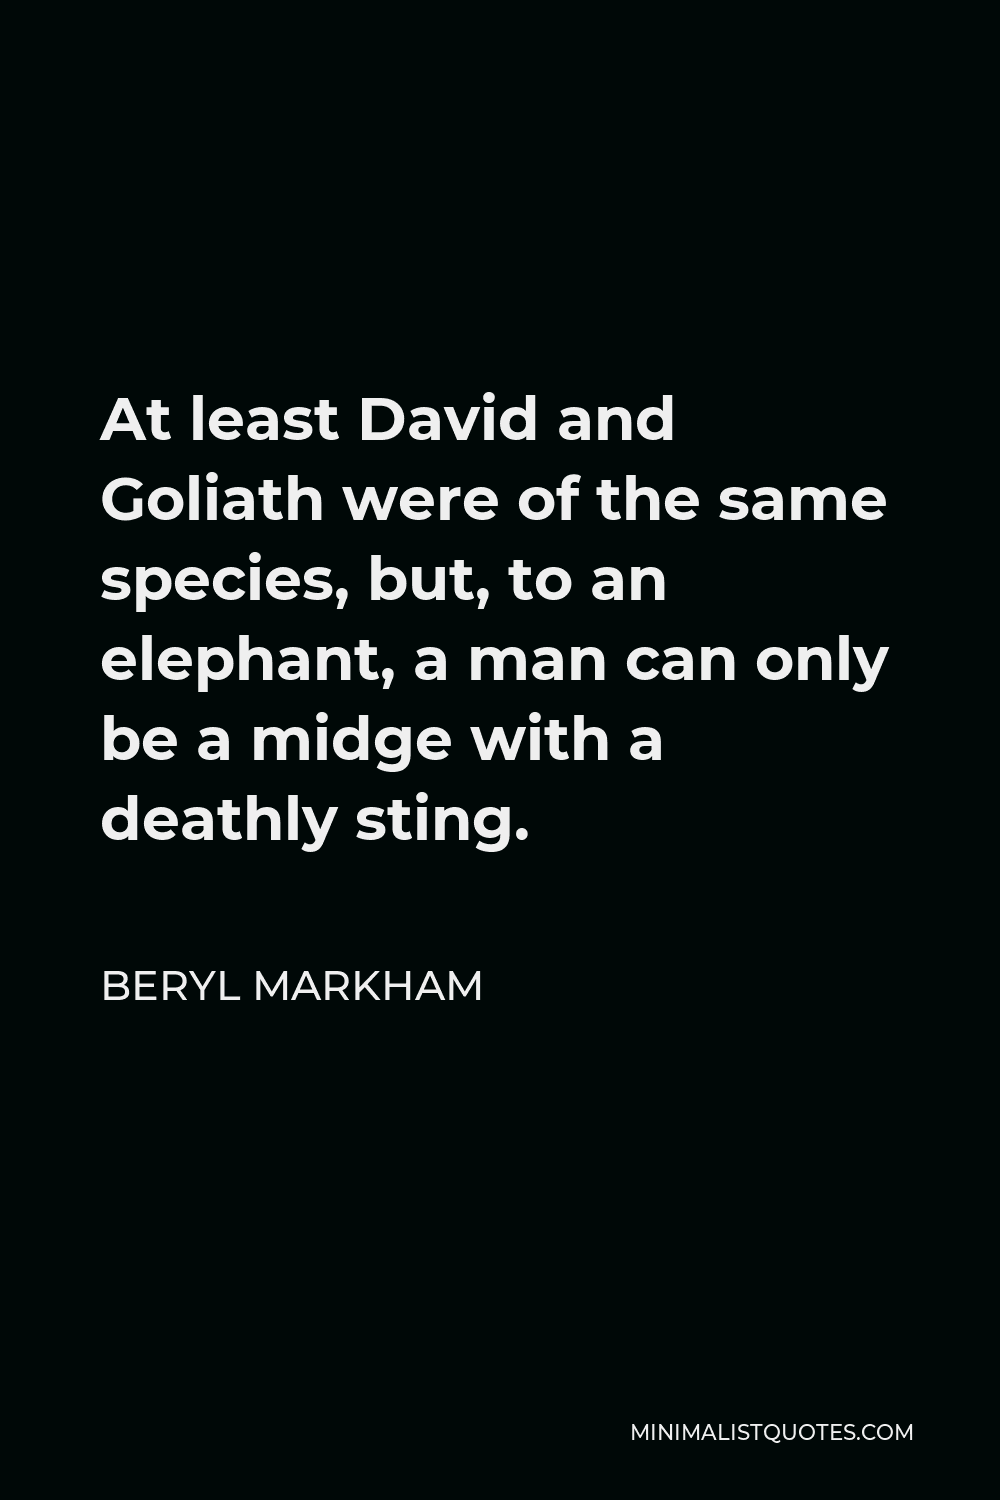 Beryl Markham Quote - At least David and Goliath were of the same species, but, to an elephant, a man can only be a midge with a deathly sting.